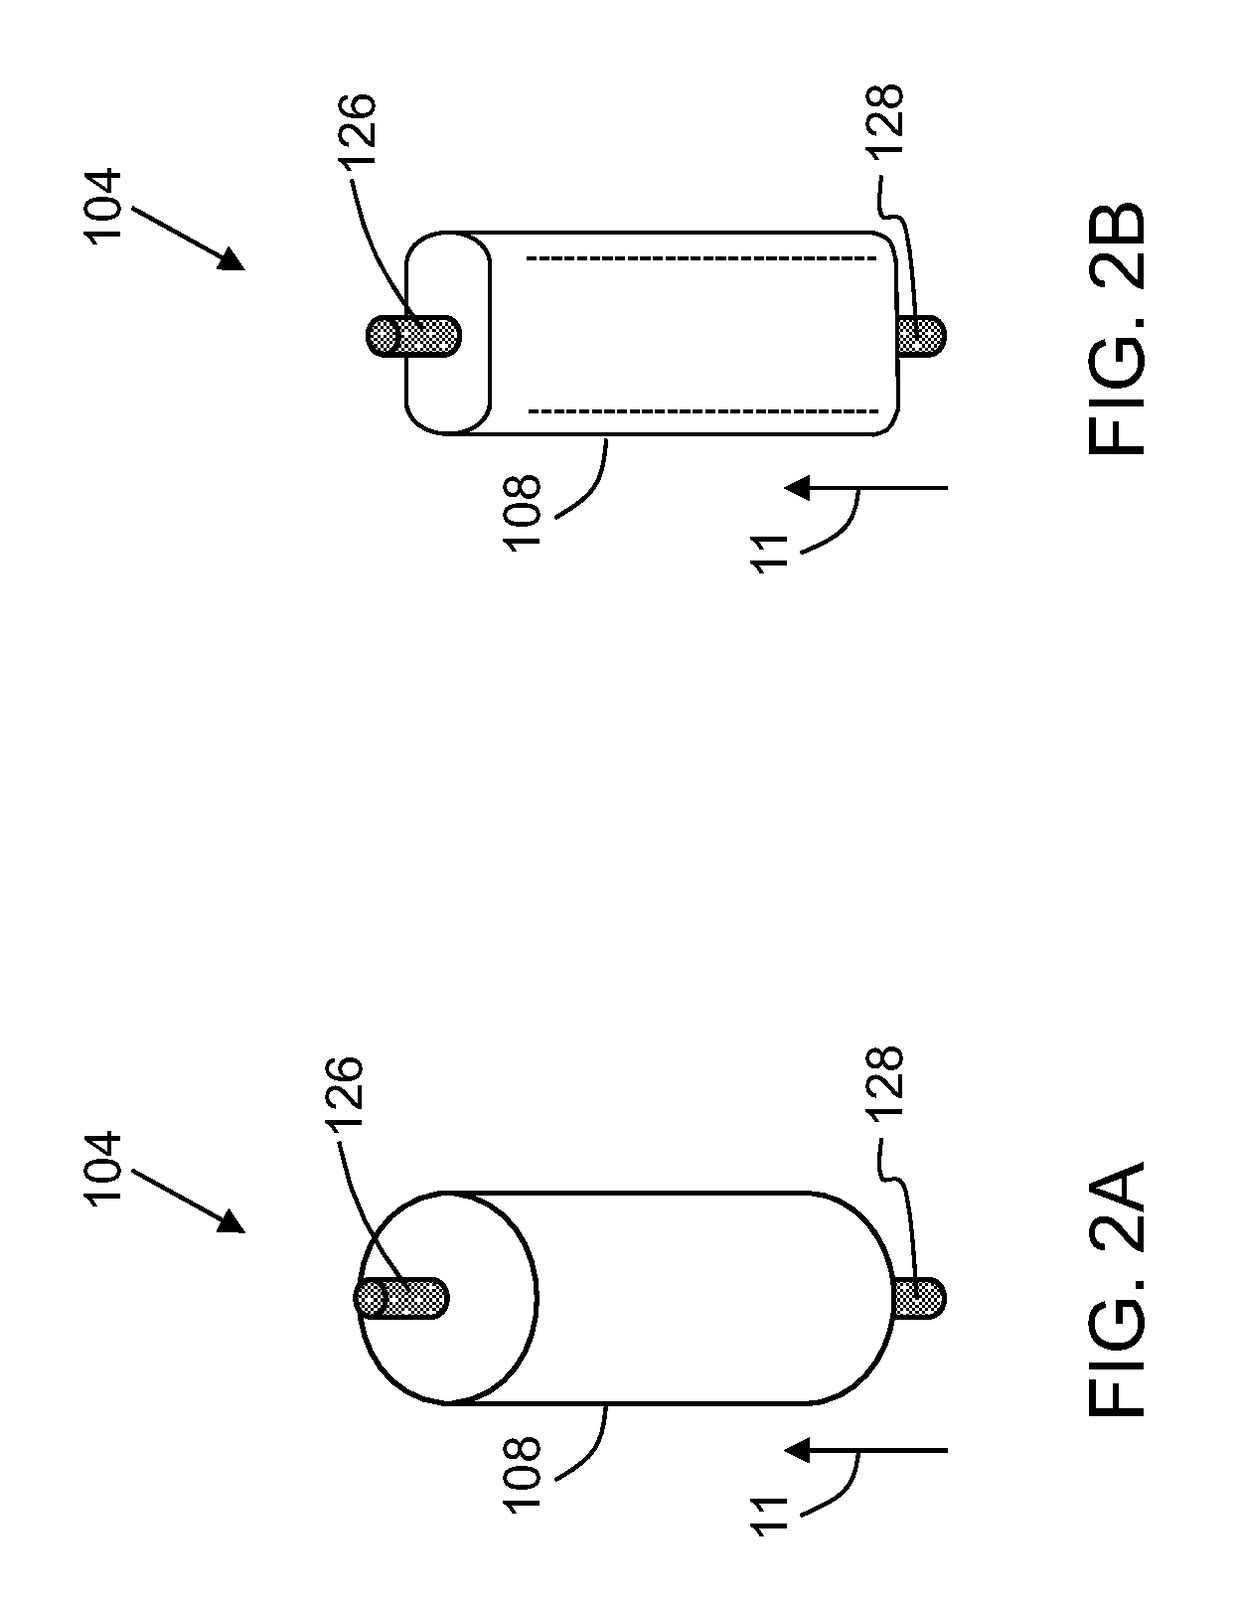 Capacitor assembly and related method of forming